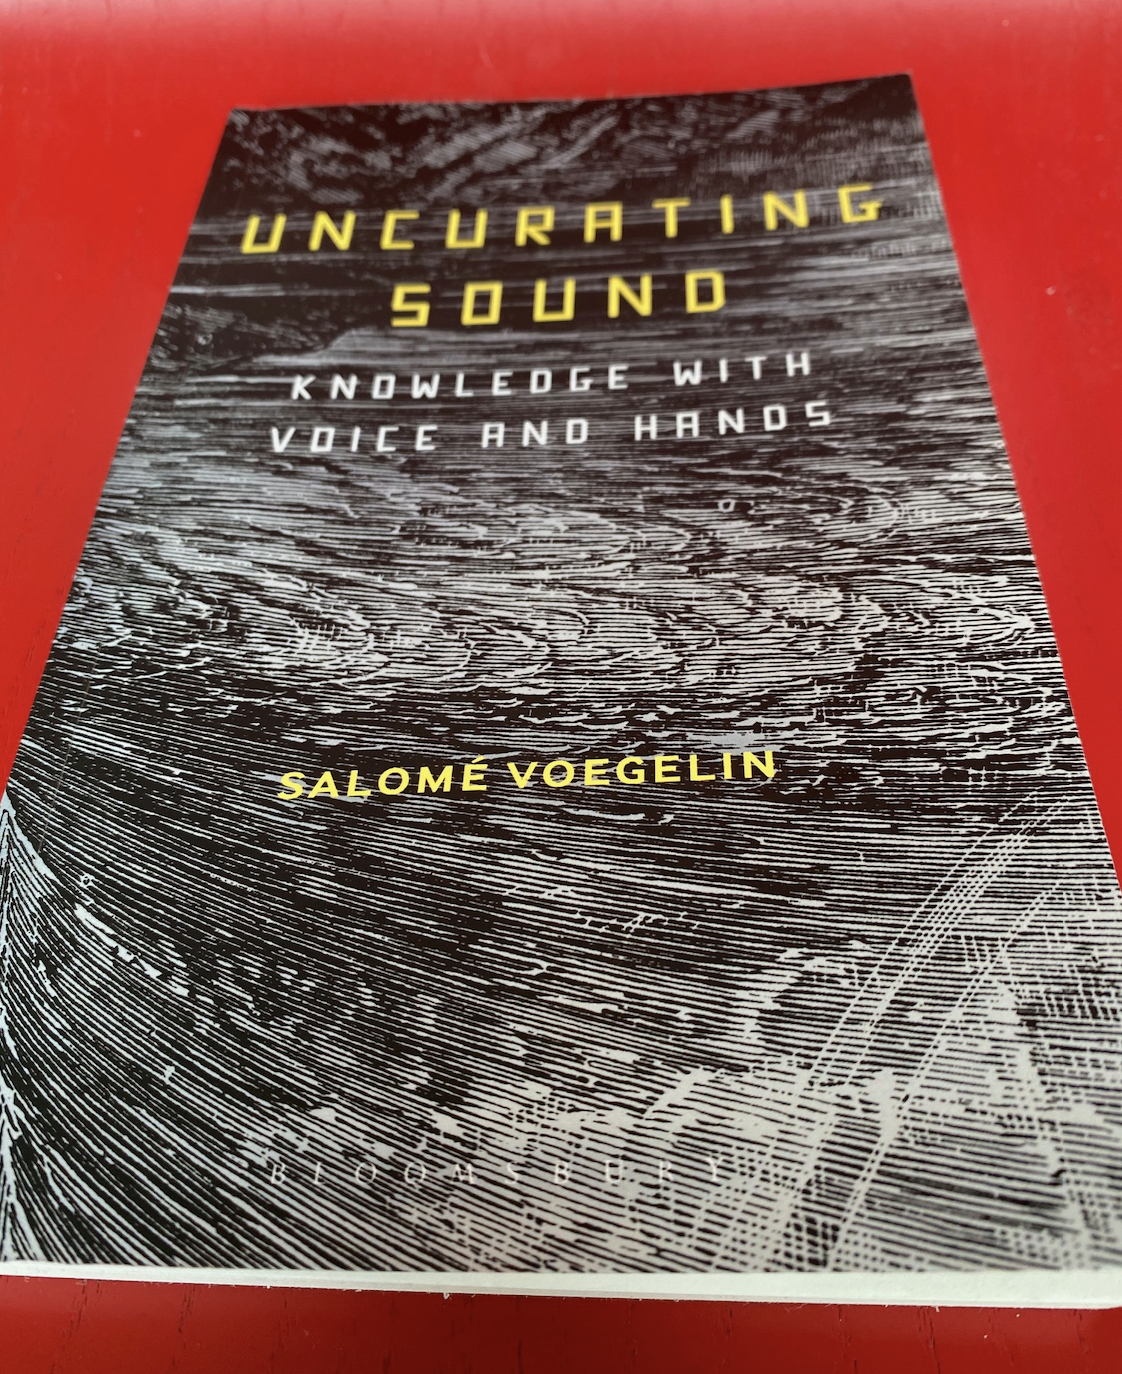 Book on a red background. Book title: Uncurating sound, knowledge with voice and hands. Salomé Voegelin. The book cover is a black and white image of a textured surface